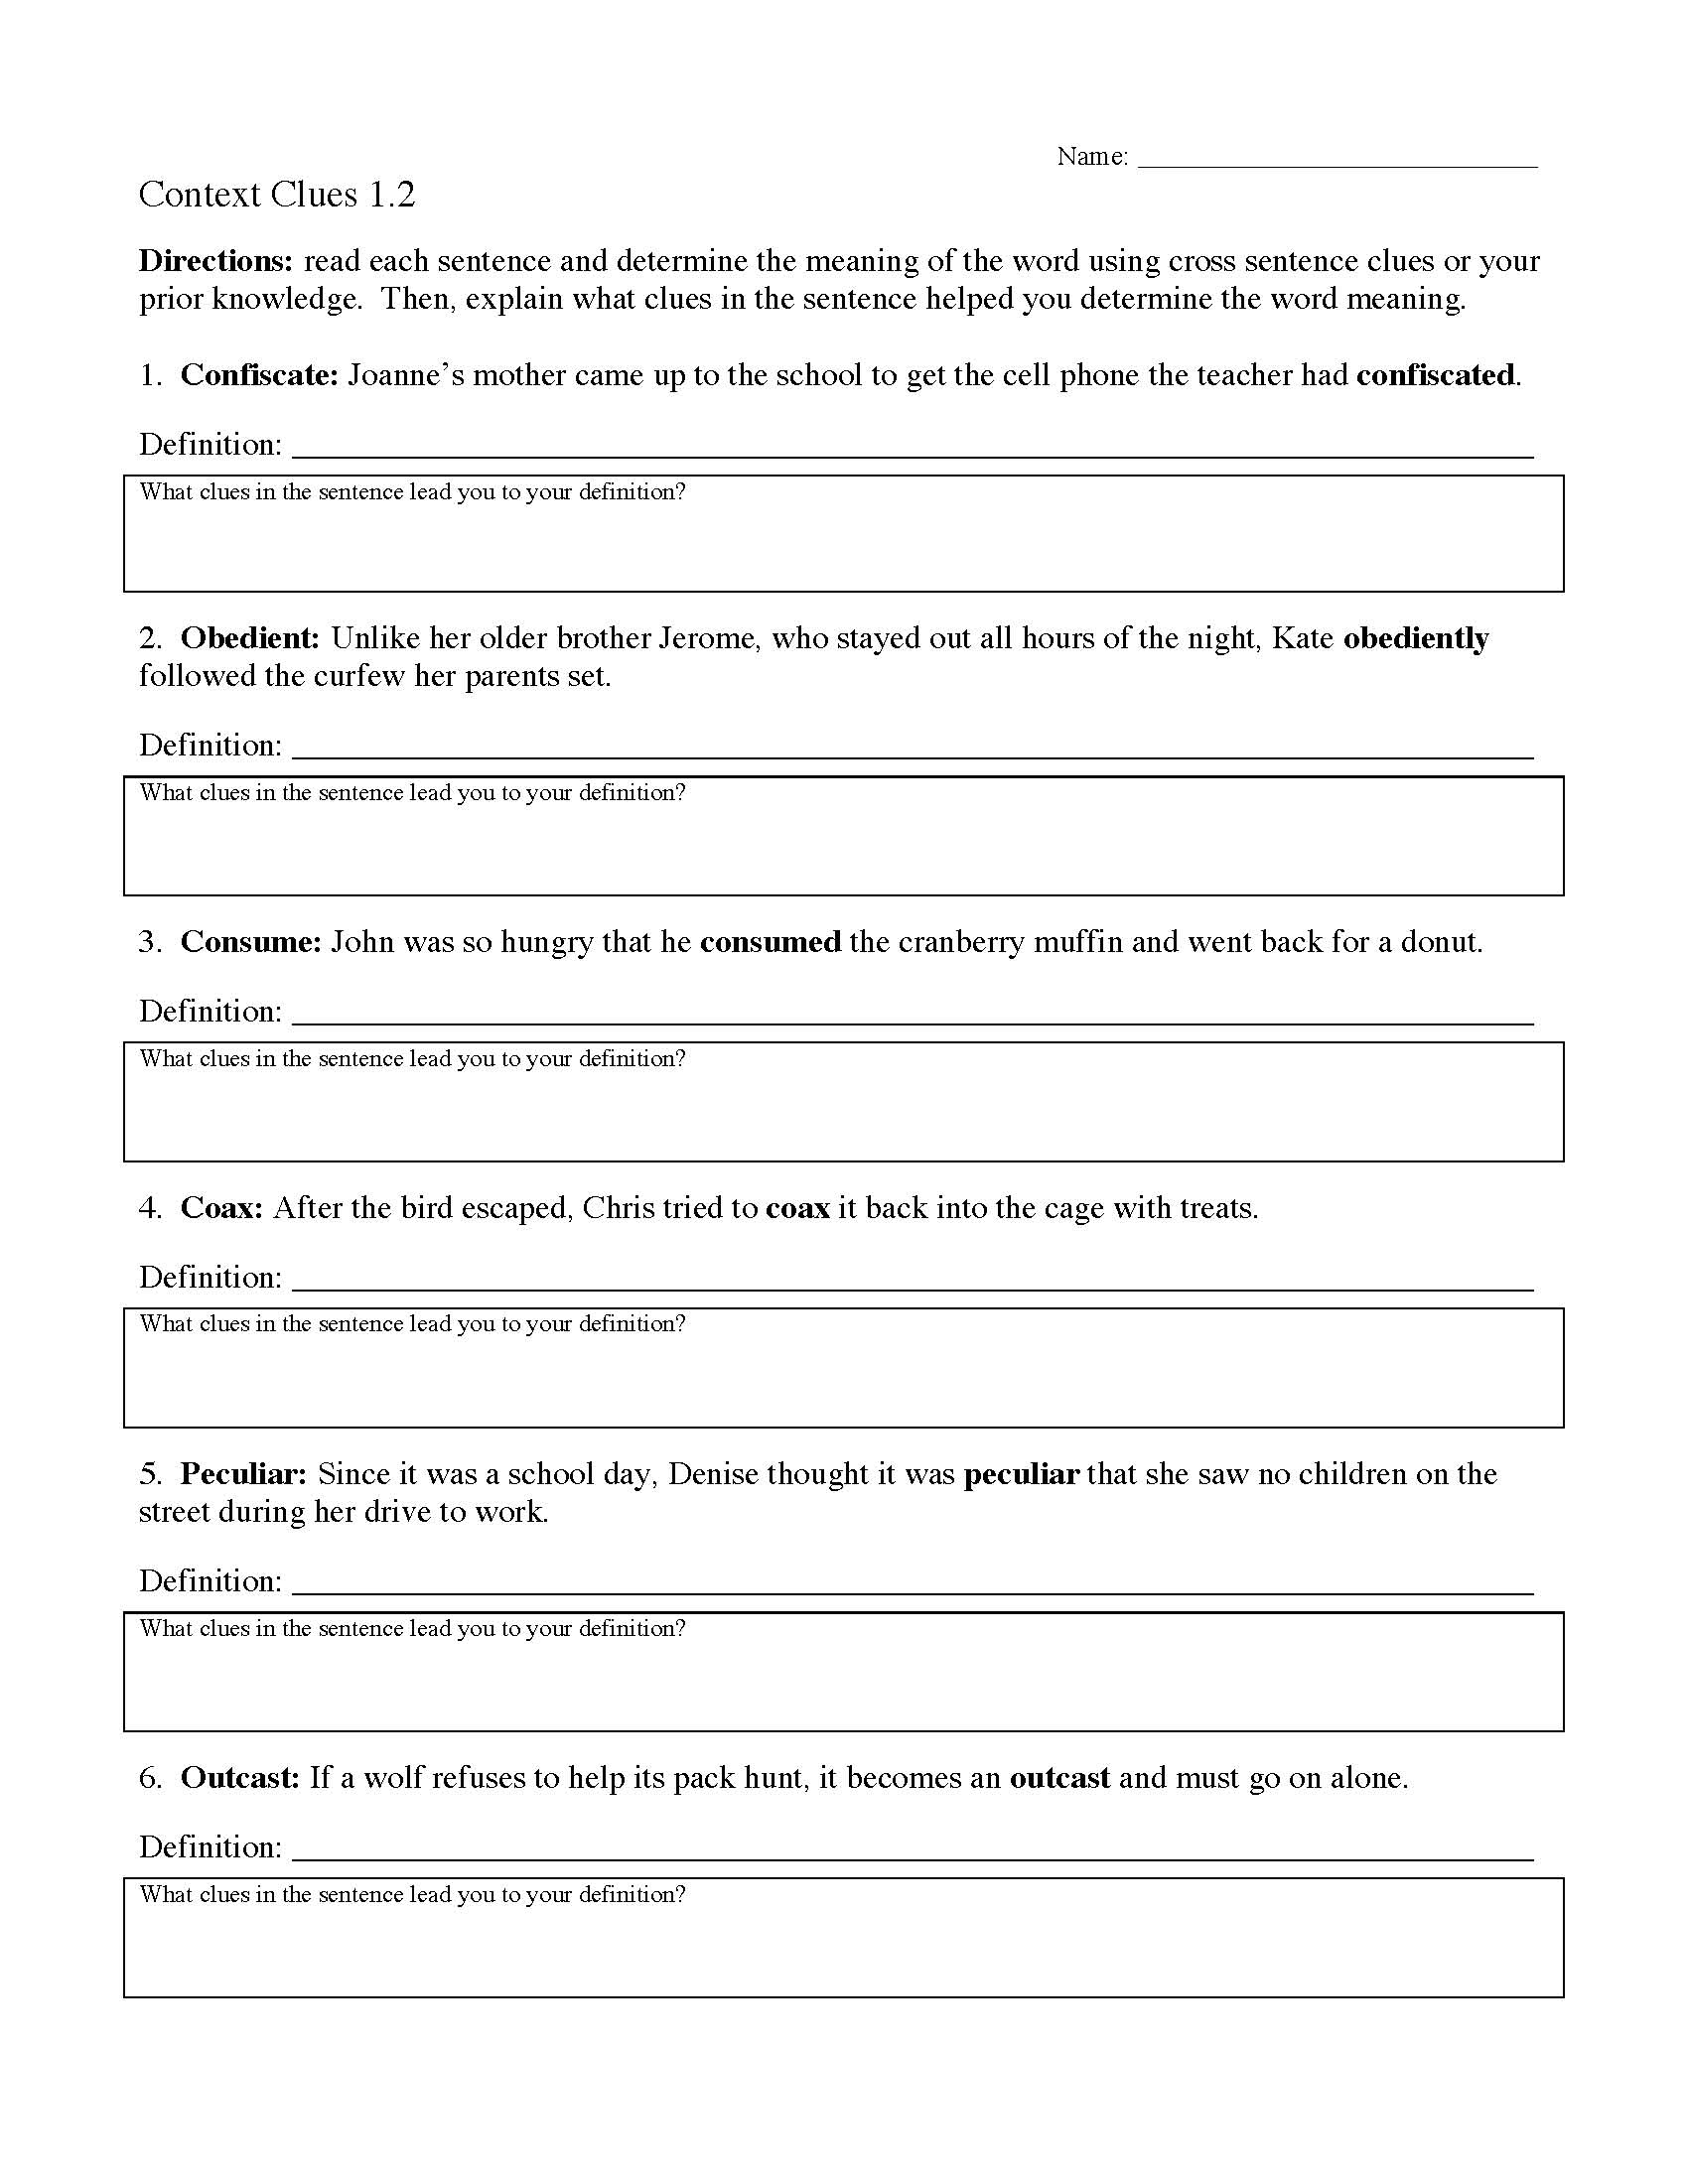 This is a preview image of Context Clues Worksheet 1.2. Click on it to enlarge it or view the source file.